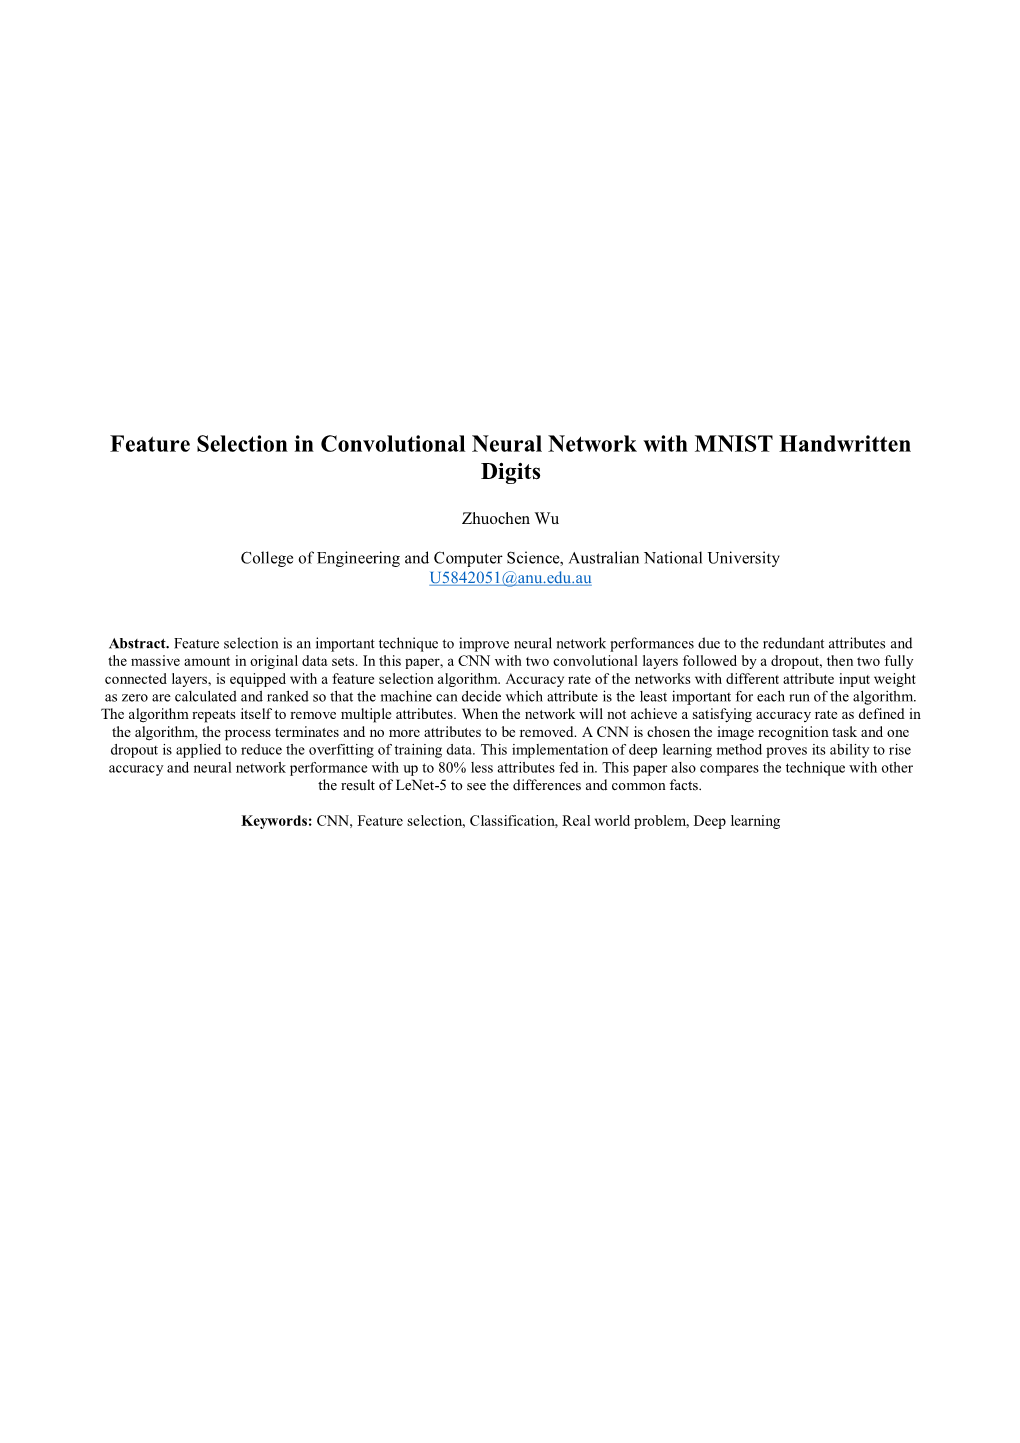 Feature Selection in Convolutional Neural Network with MNIST Handwritten Digits